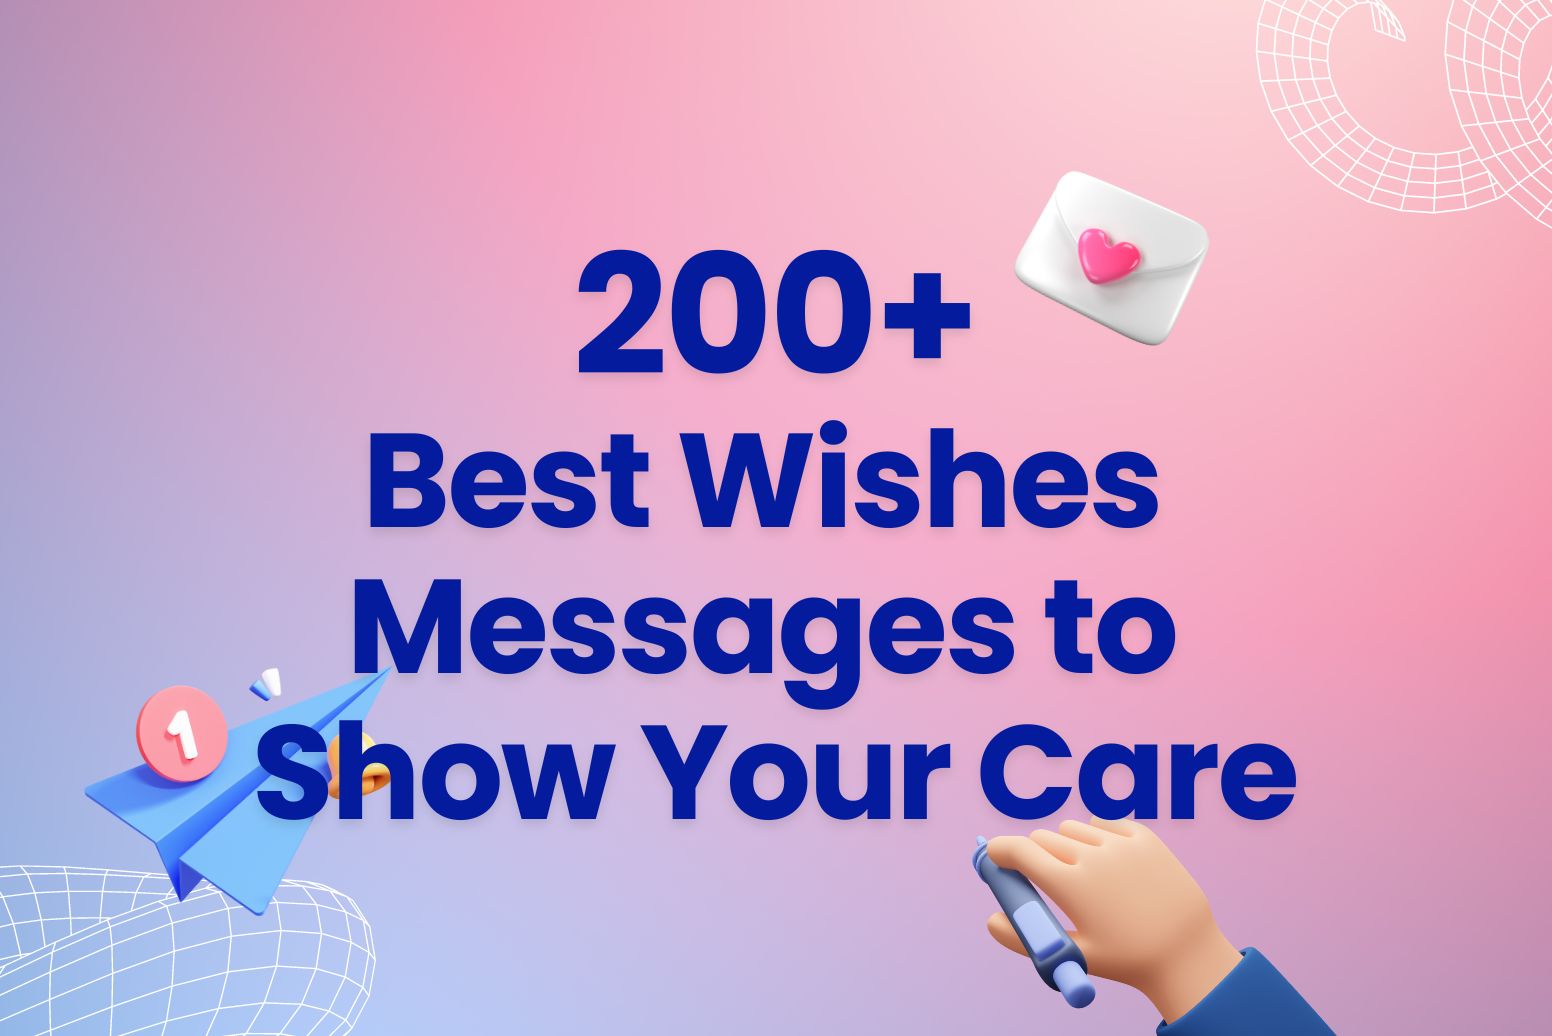 200+ Best Wishes Messages to Show Your Support and Care